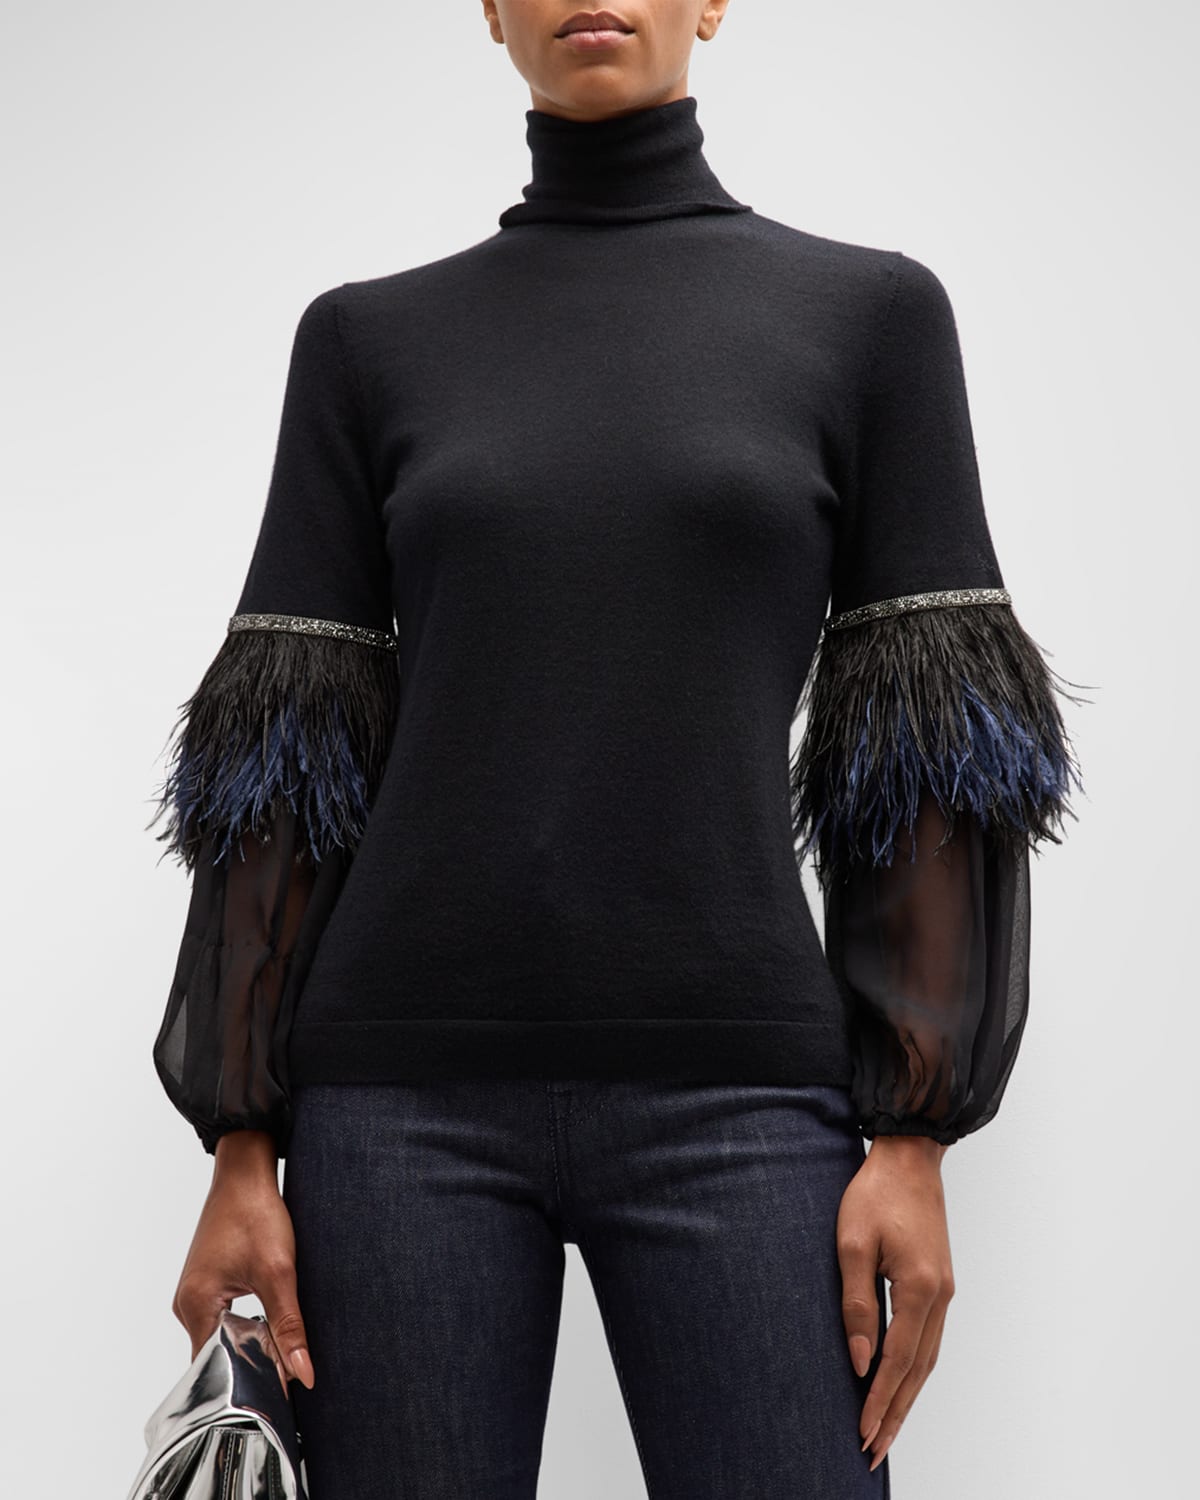 Neiman Marcus Superfine Cashmere Jumper With Chiffon Feather Sleeves In Black